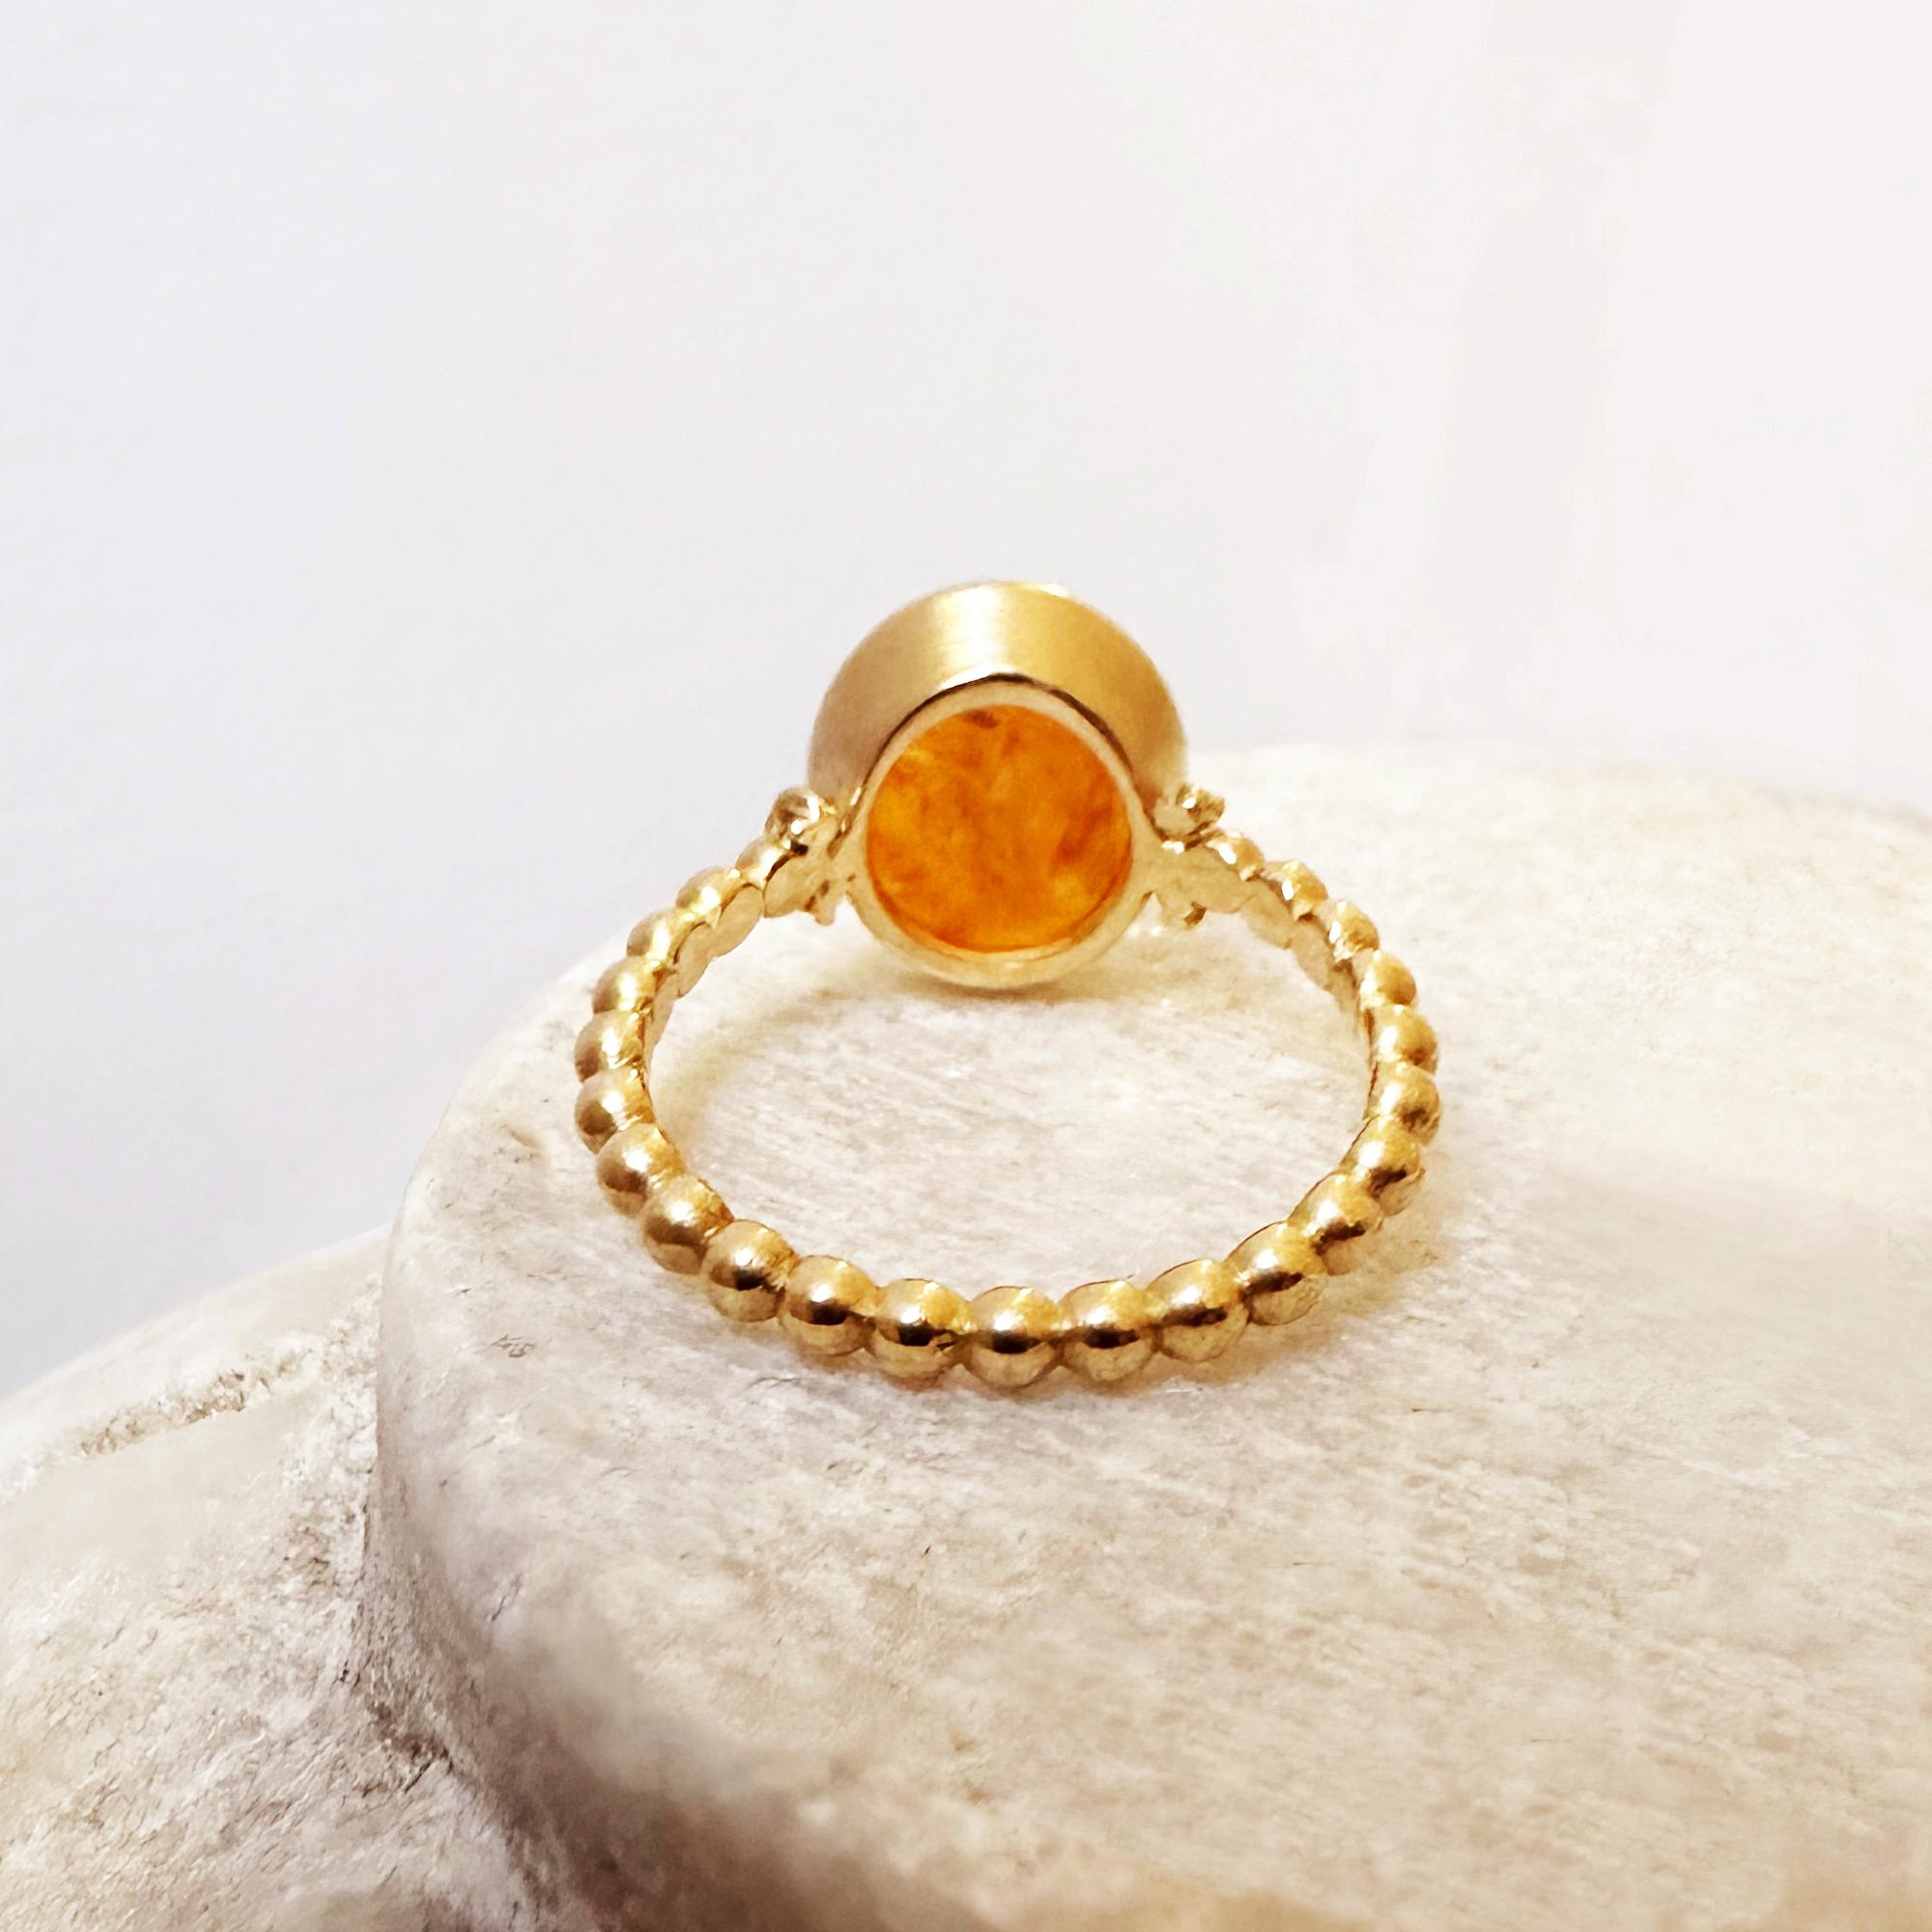 Oval Cut Genuine Roman intaglio 1st-2nd cent. AD 18 kt Gold Ring depicting Goddess Athena For Sale